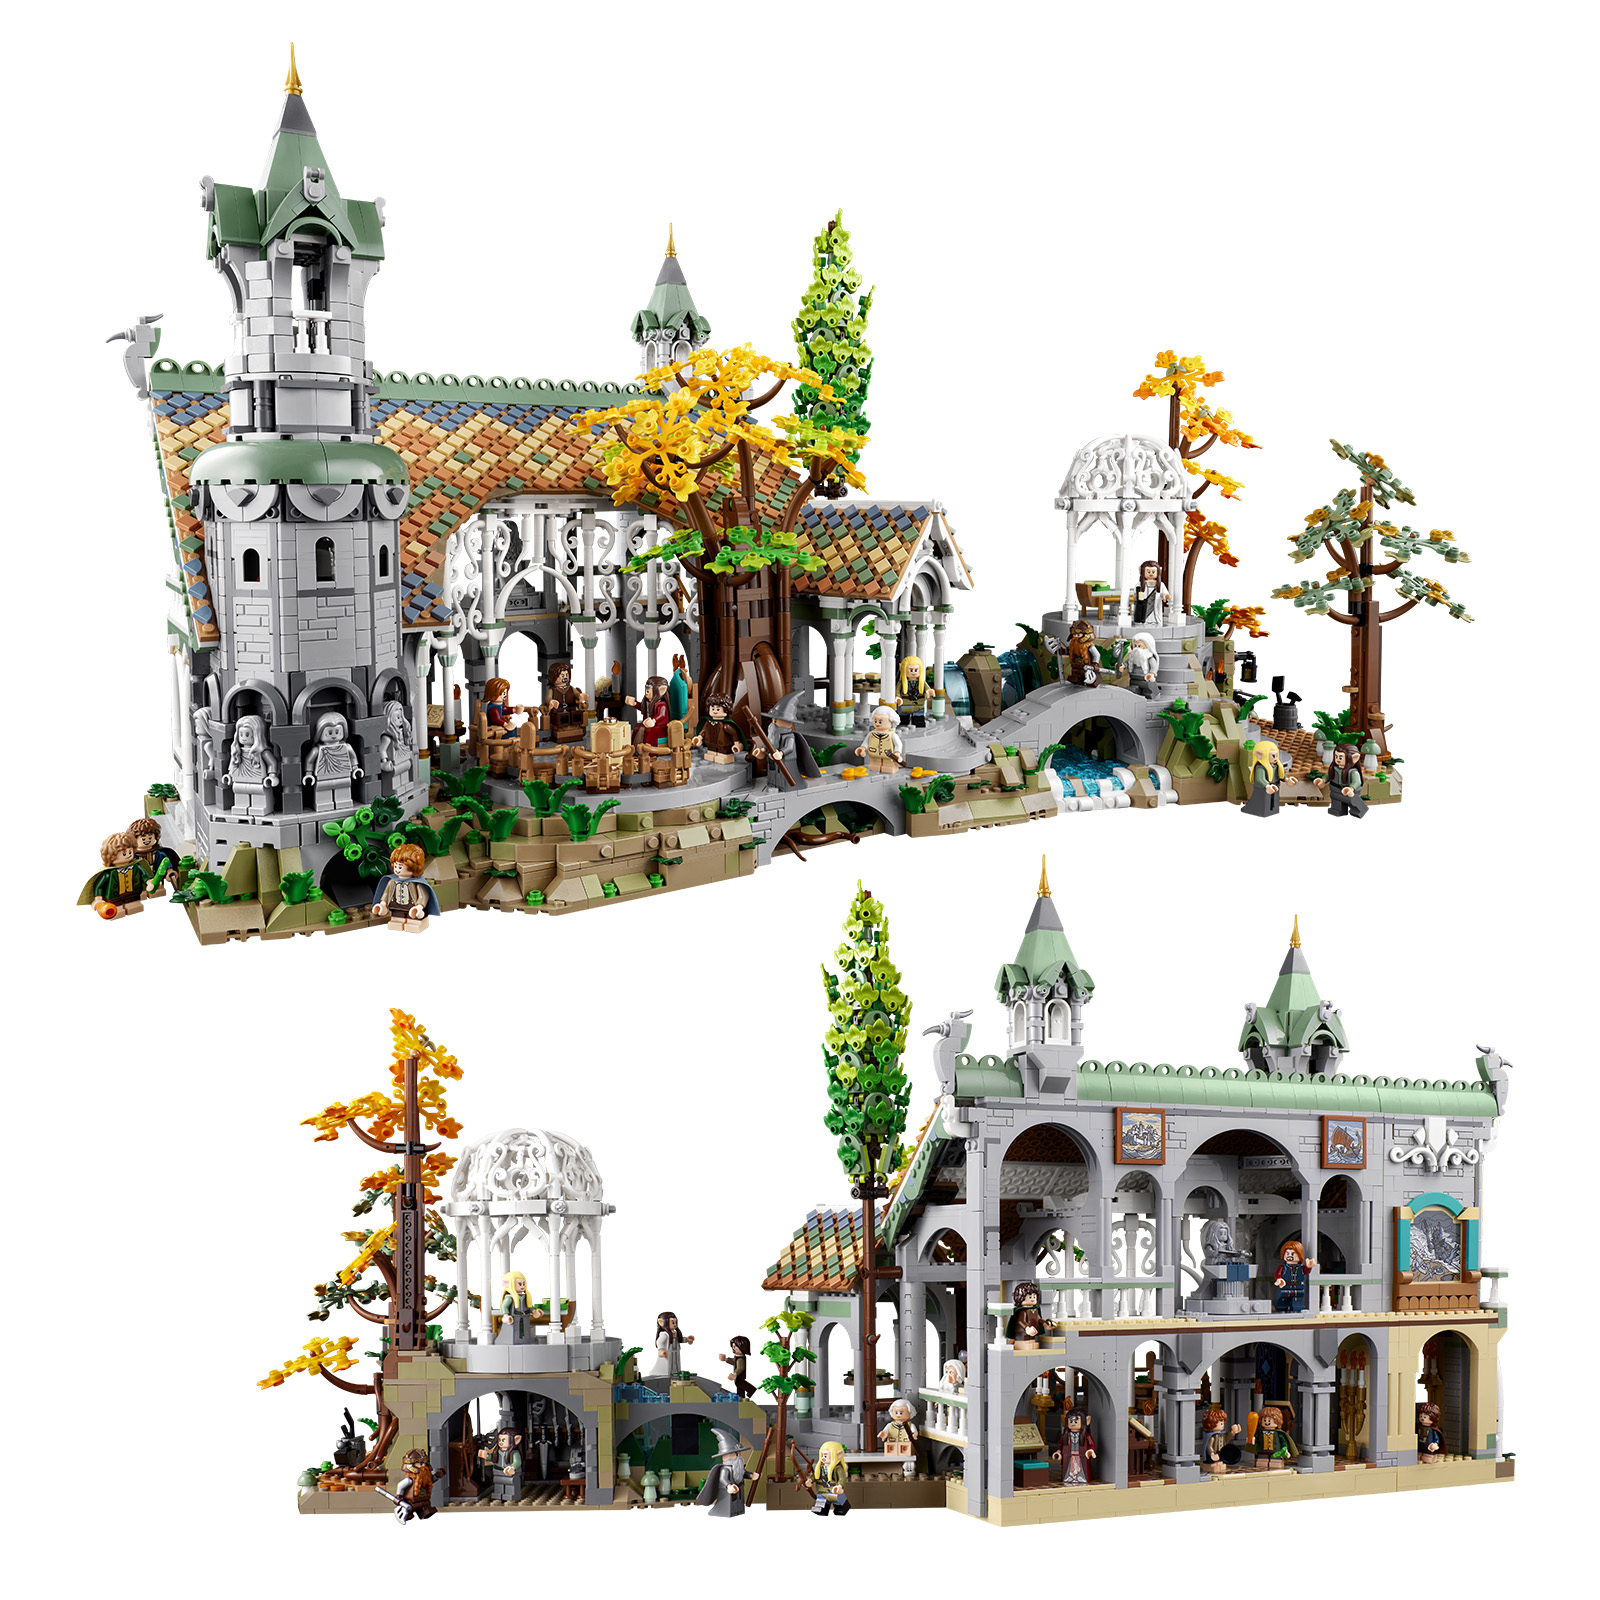 [LEGO] THE LORD OF THE RING / THE HOBBIT seigneur anneaux - Page 7 Lego-icons-10316-lord-rings-rivendell-_1